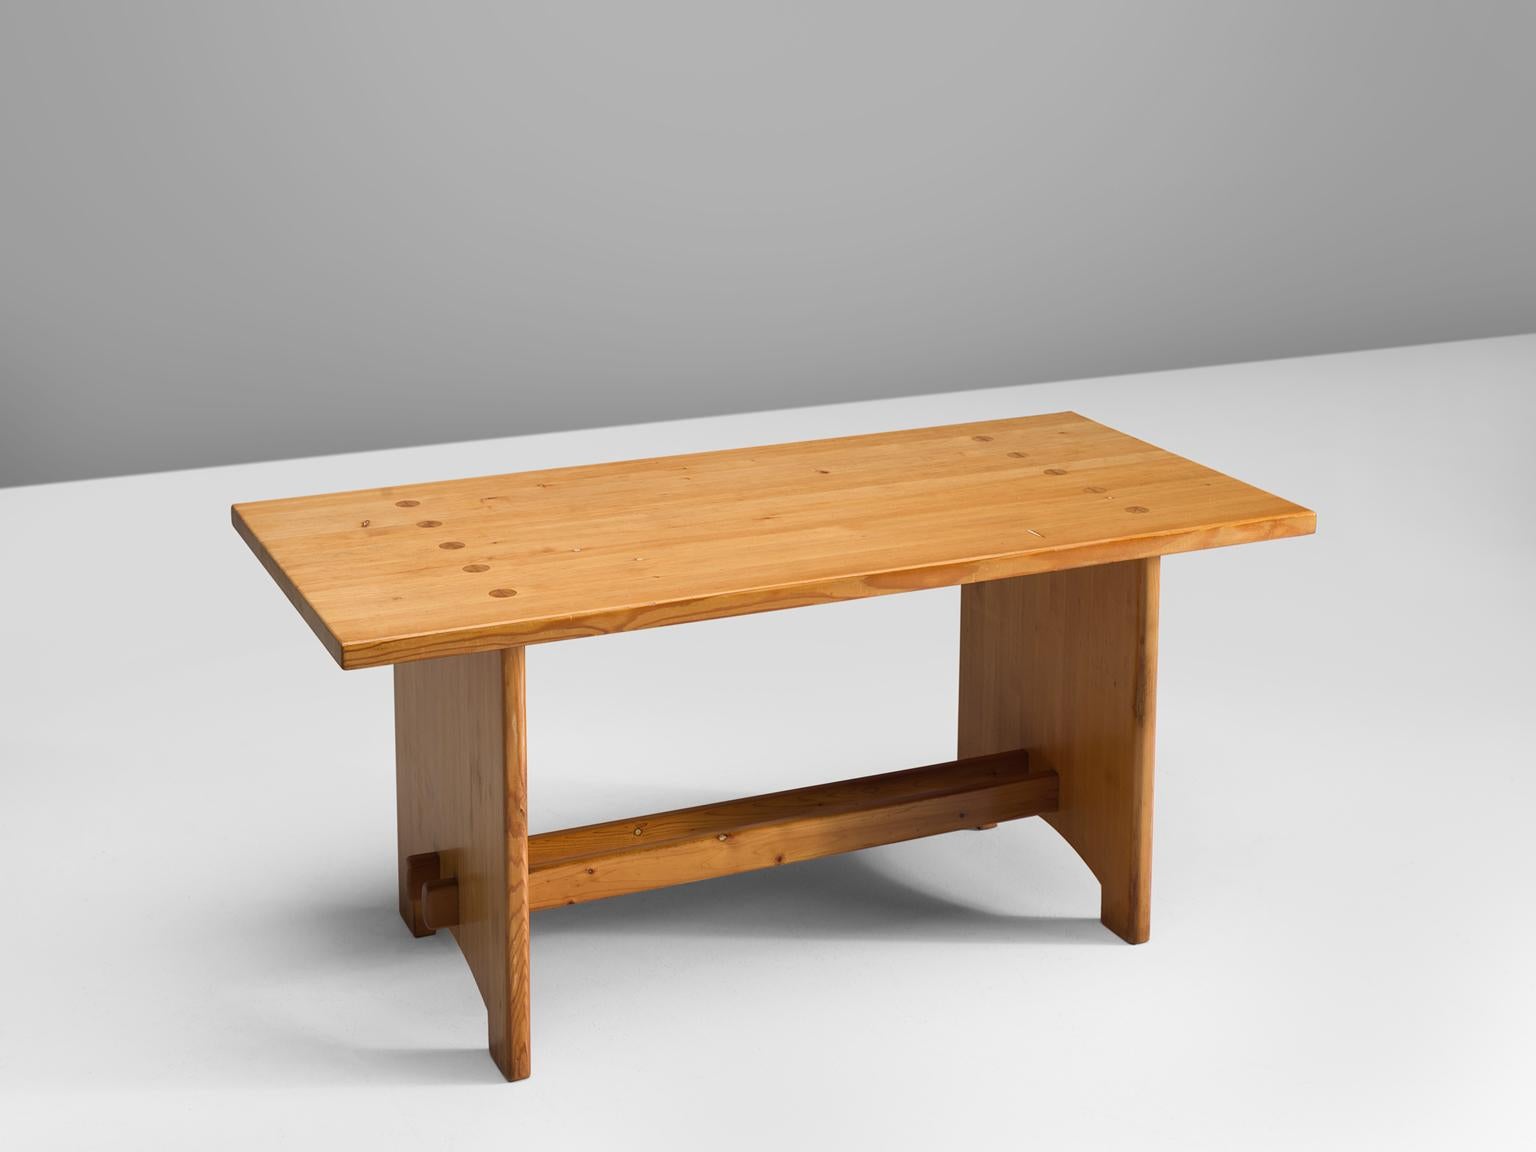 Jacob Kielland-Brandt, dining table, solid pine, Denmark, 1960s.

This remarkable table holds a strong expression and this organic shaped design is in well contrast with the solid high tapered legs which provides an open elegant look. We also have